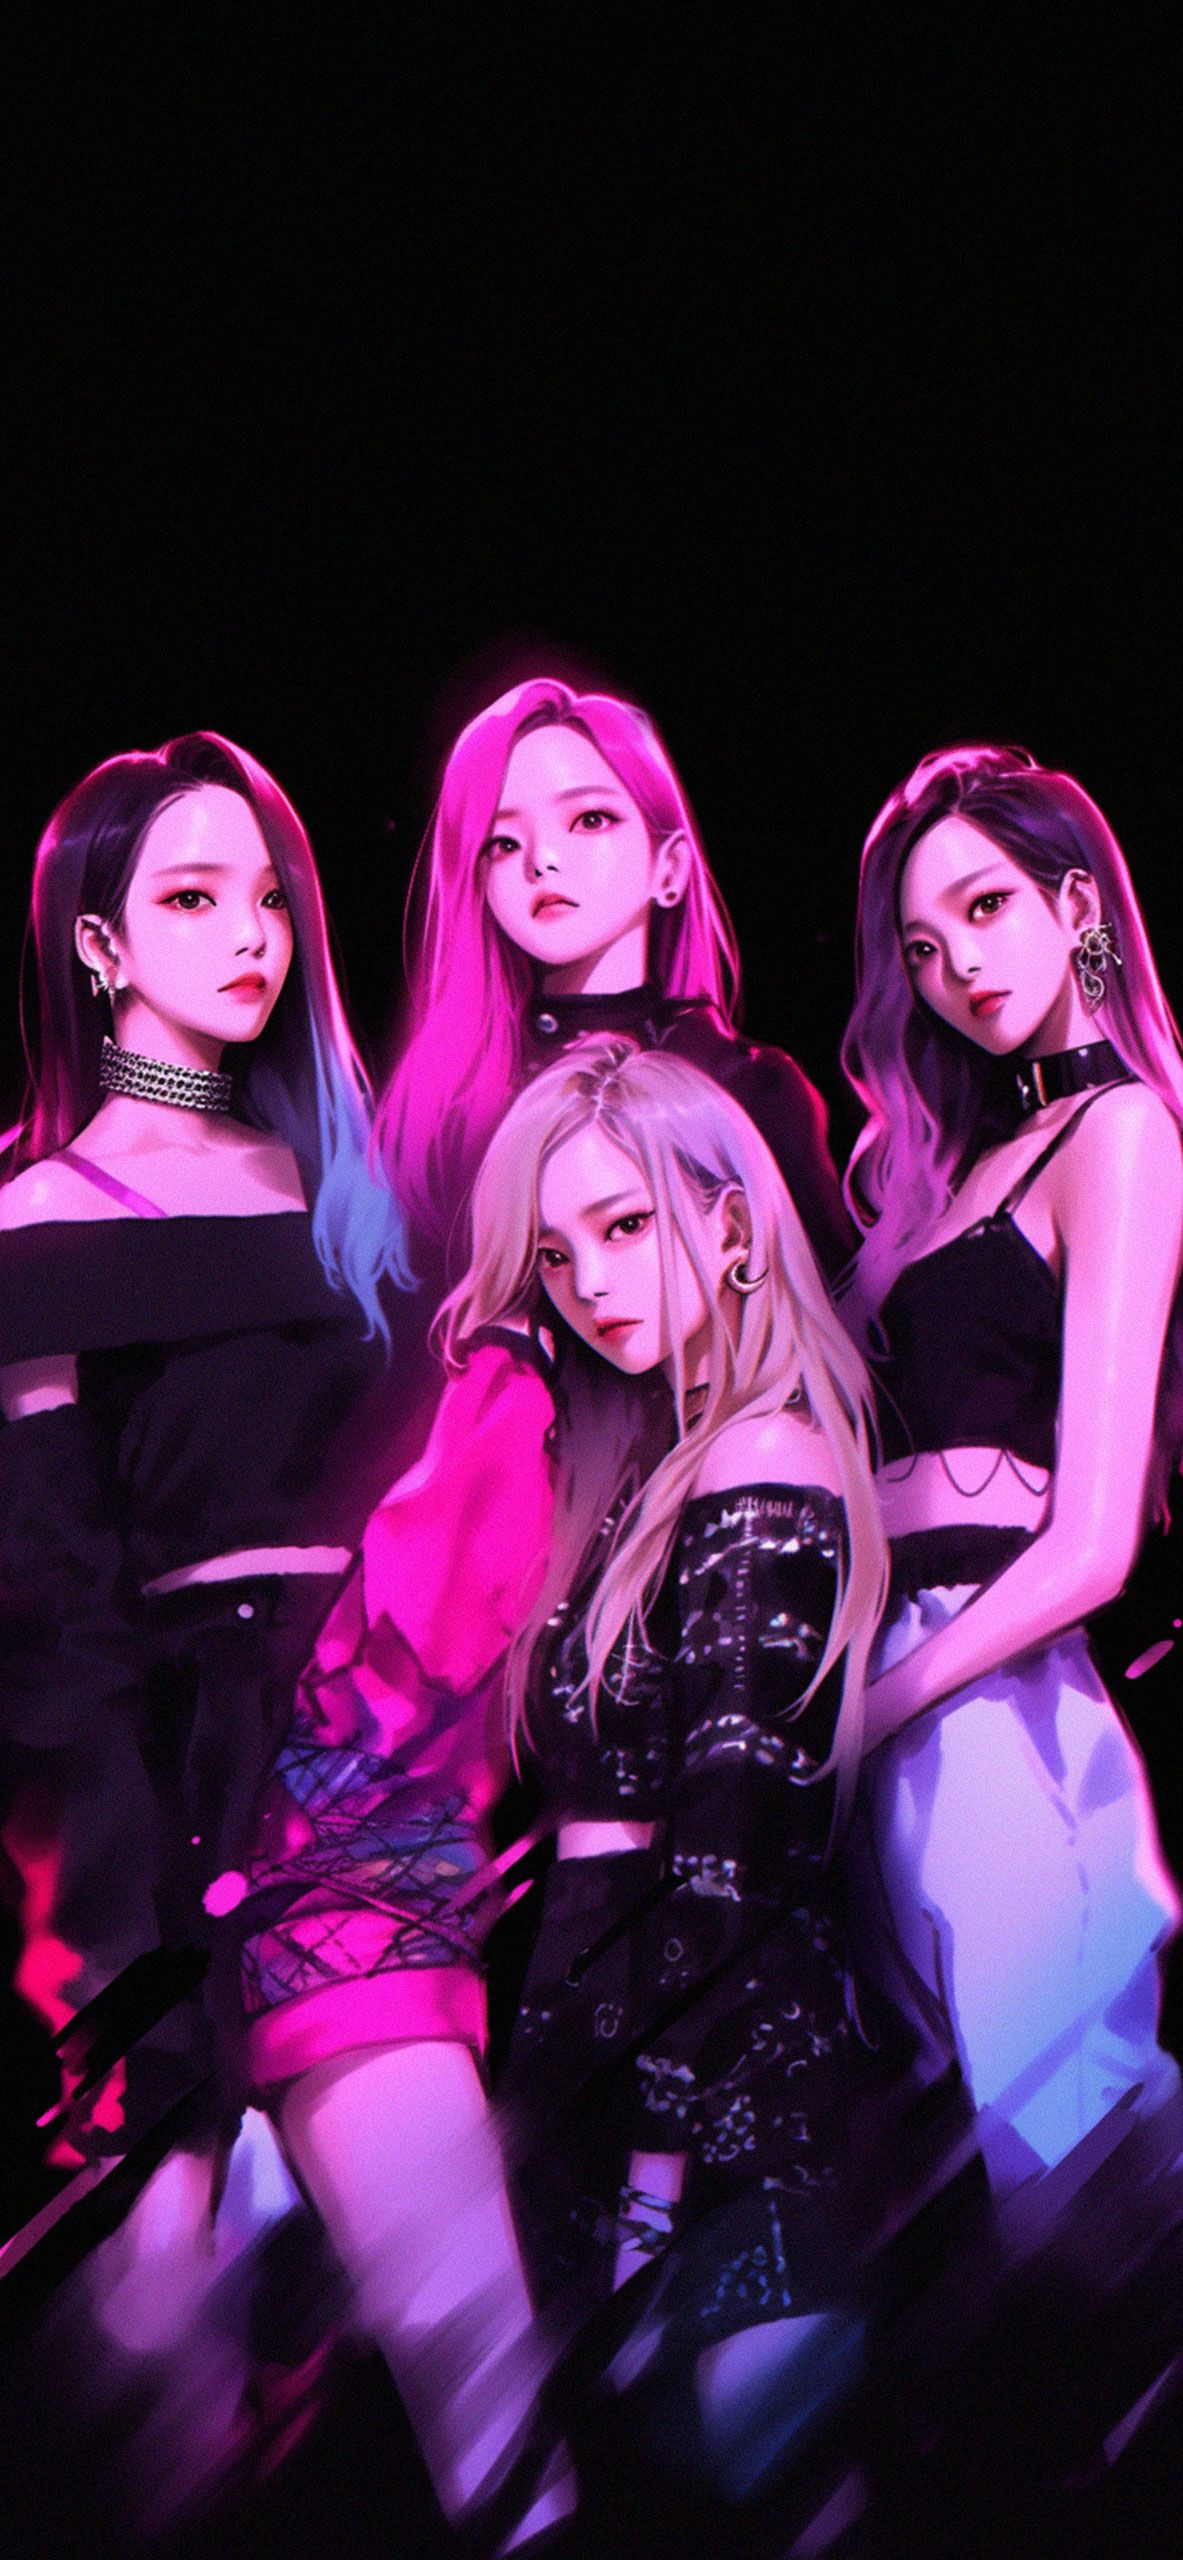 Blackpink wallpaper iphone with high-resolution 1080x1920 pixel. You can use this wallpaper for your iPhone 5, 6, 7, 8, X, XS, XR backgrounds, Mobile Screensaver, or iPad Lock Screen - BLACKPINK